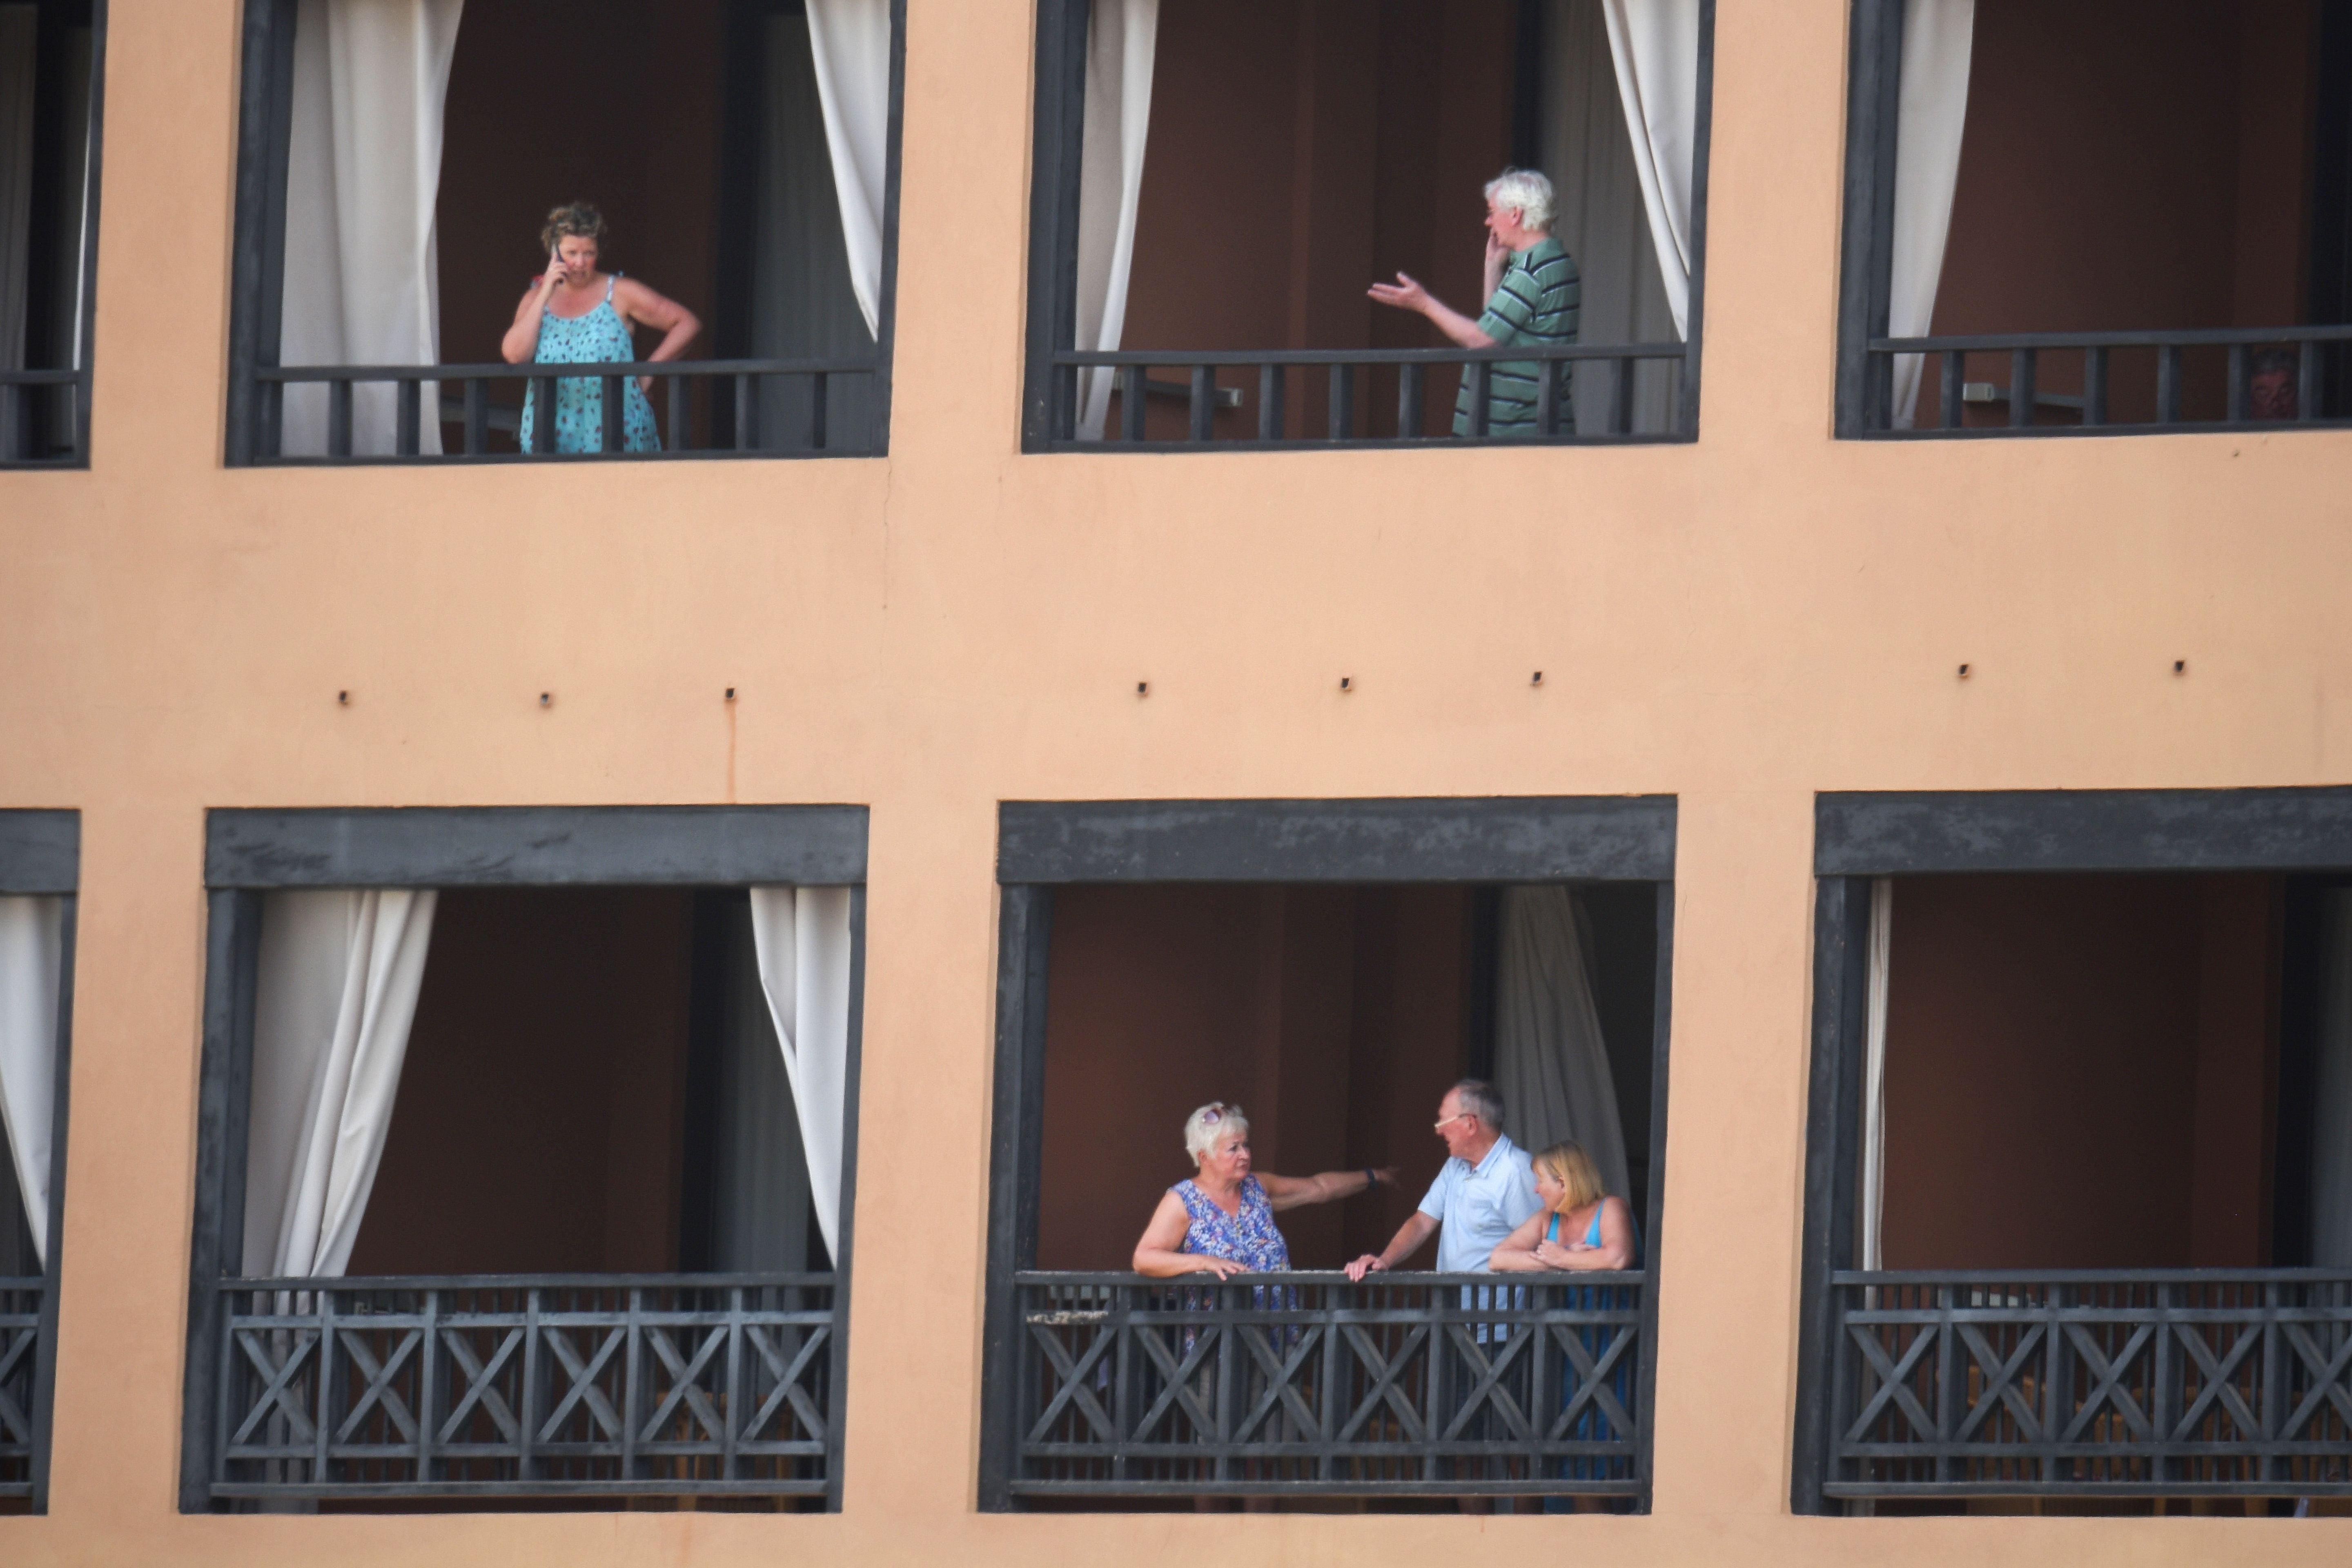 Hundreds of people were confined to their hotel room in Tenerife after an Italian tourist was hospitalised with a suspected case of coronavirus